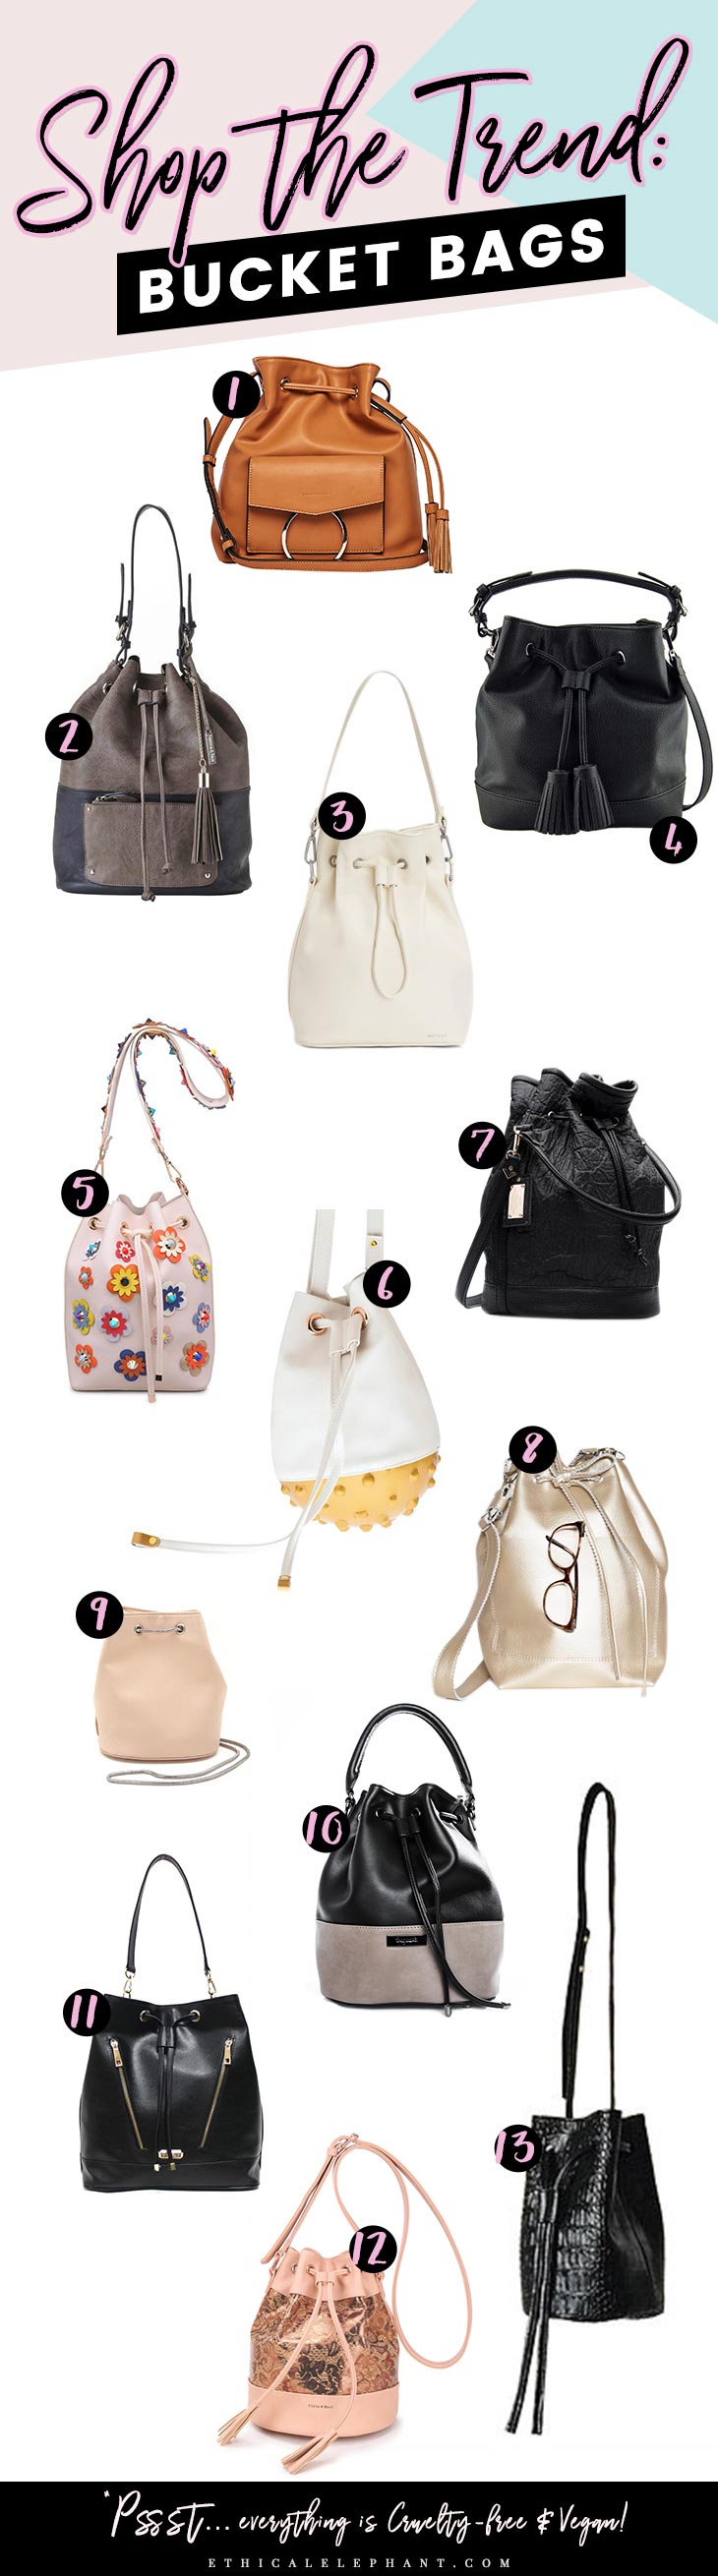 Shop the Trend in cruelty-free & vegan fashion. This week, we talk about vegan bucket bags to staying on trend! 